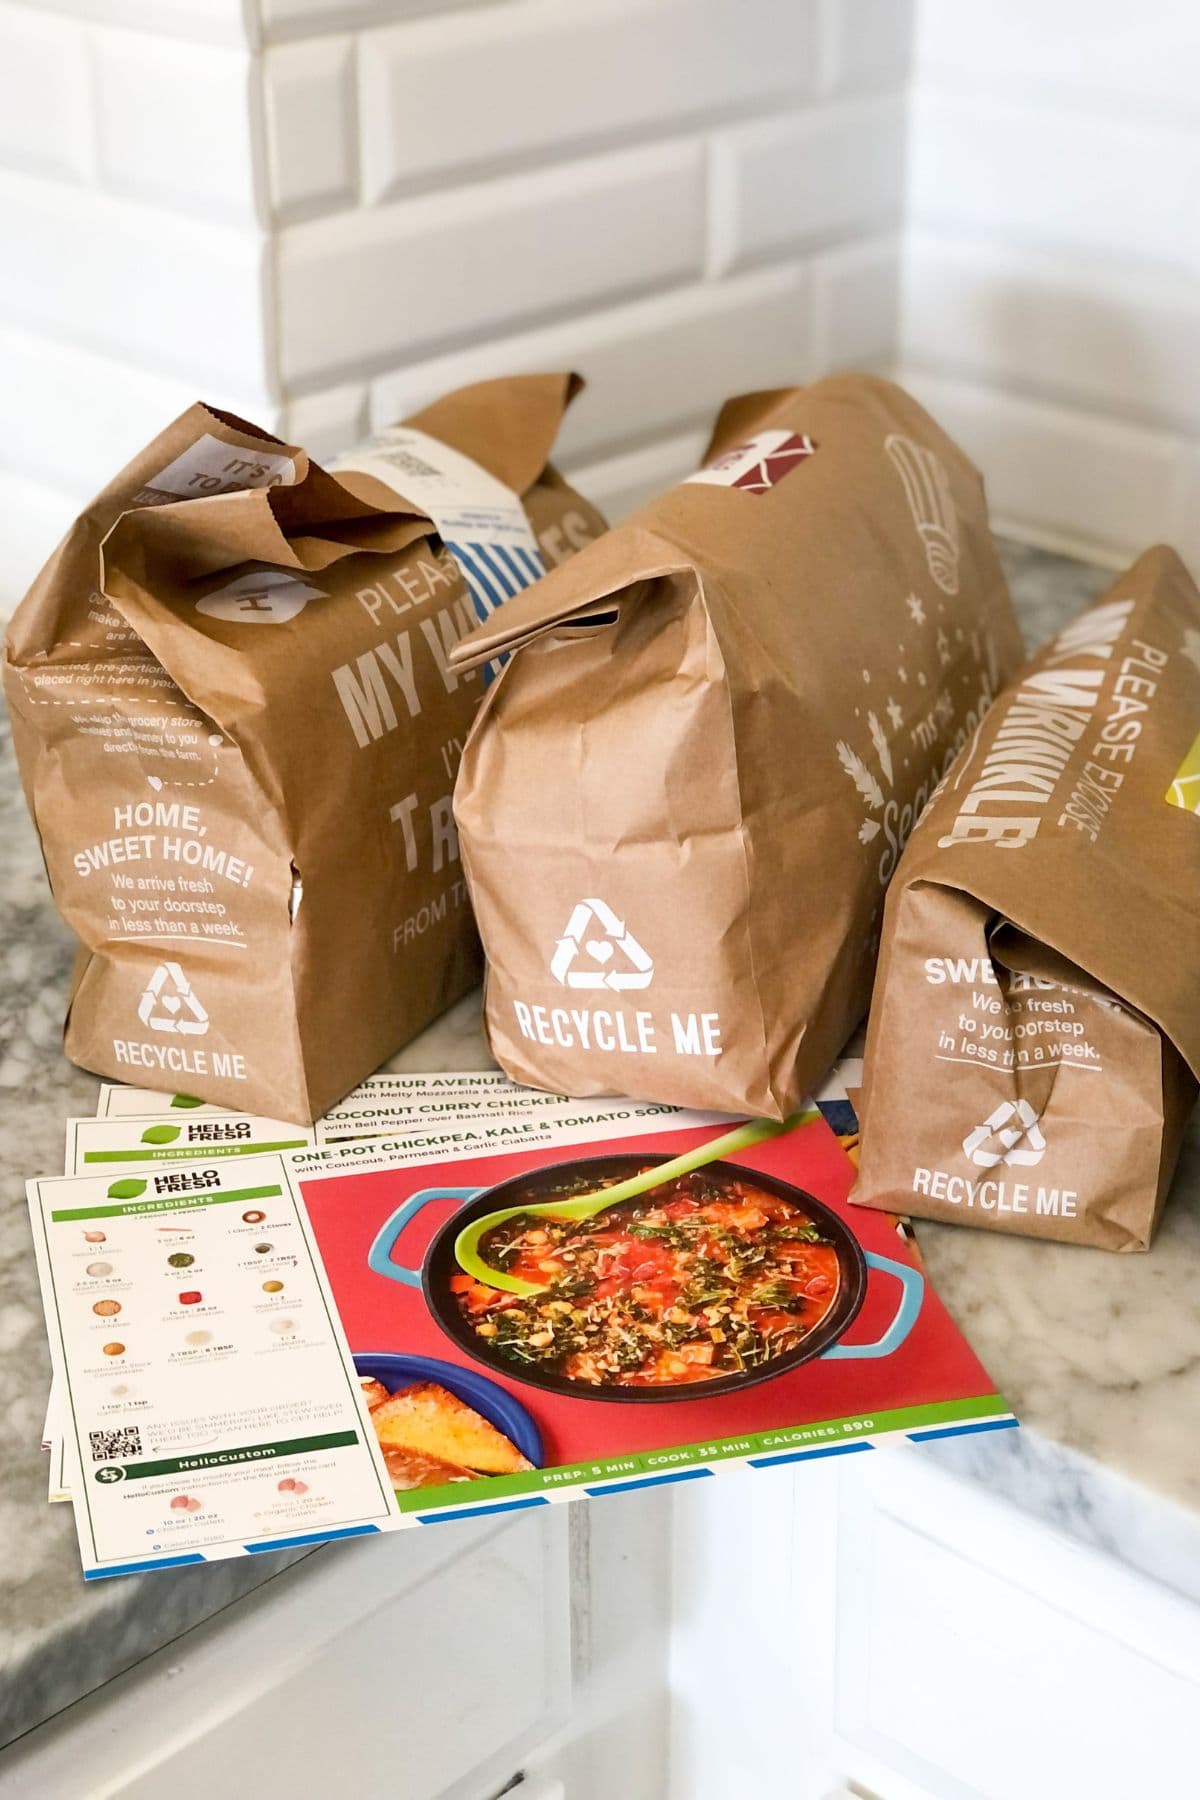 HelloFresh recipe cards on a marble counter next to HelloFresh paper bags with ingredients inside